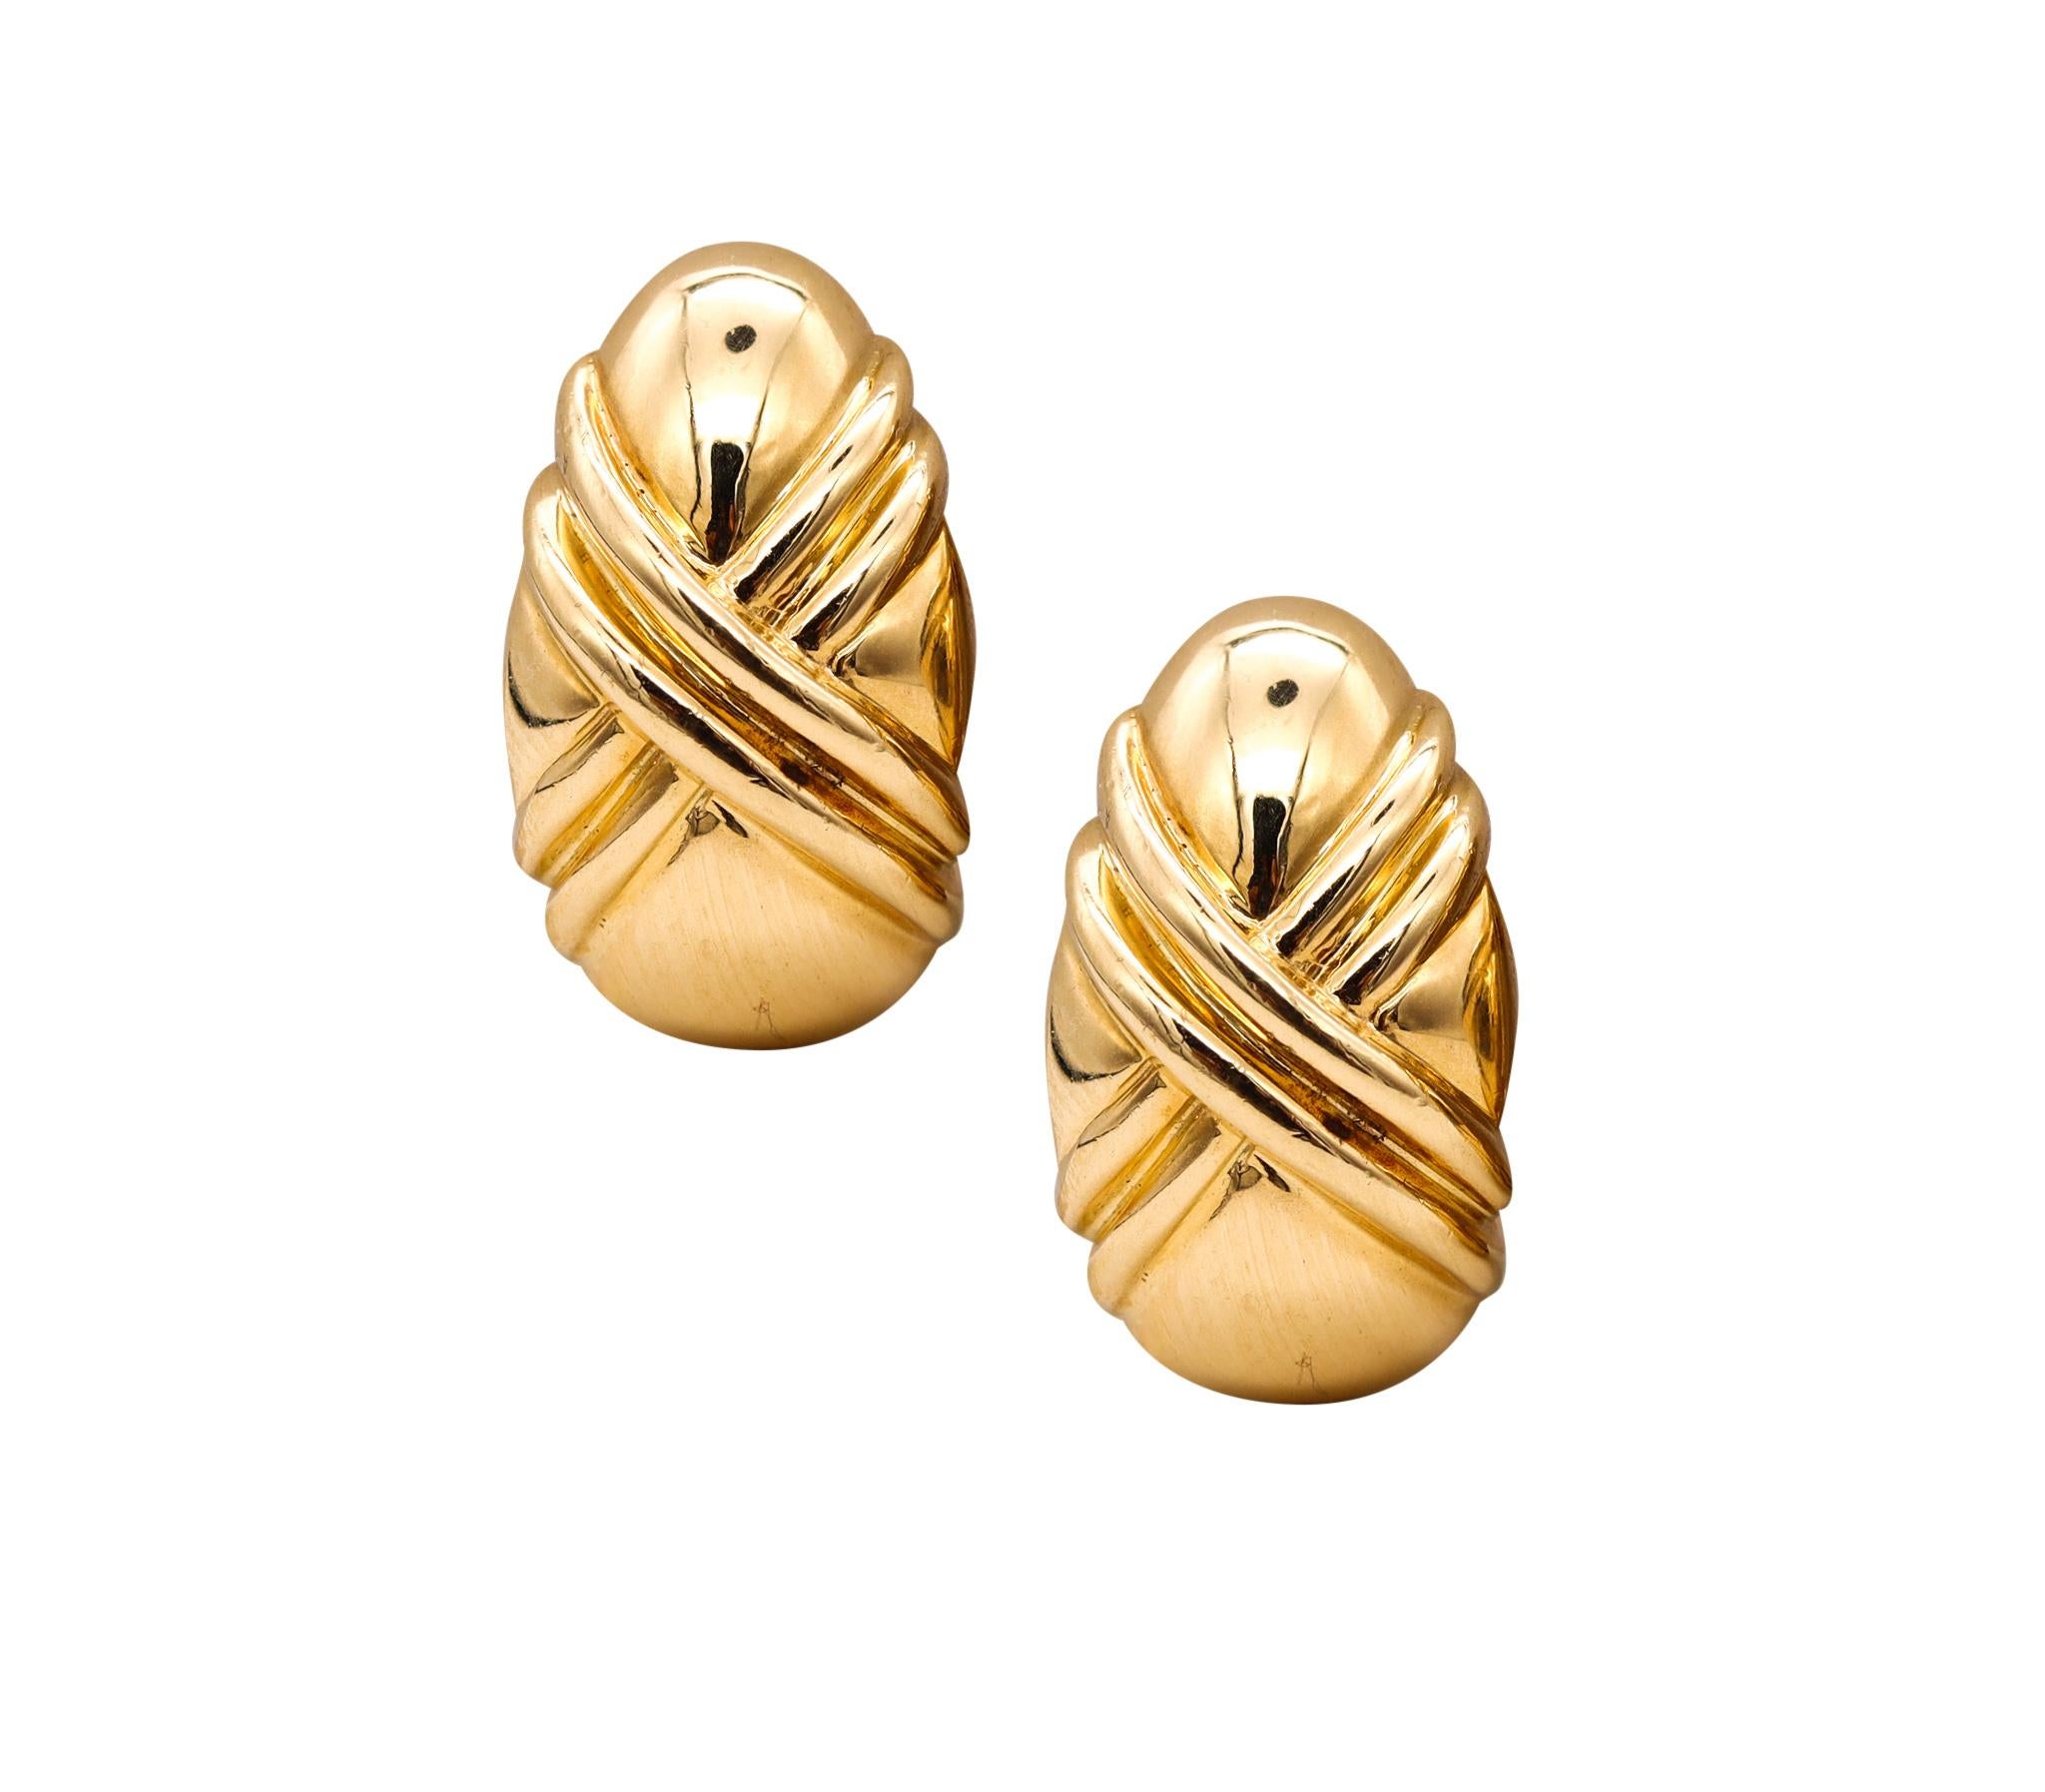 Clips-Earrings designed by Bvlgari.

An everyday pieces, created in Milano Italy by the iconic house of Bvlgari. These beautiful clips-earrings has been carefully crafted in solid yellow gold of 18 karats, with high polish finish and suited with